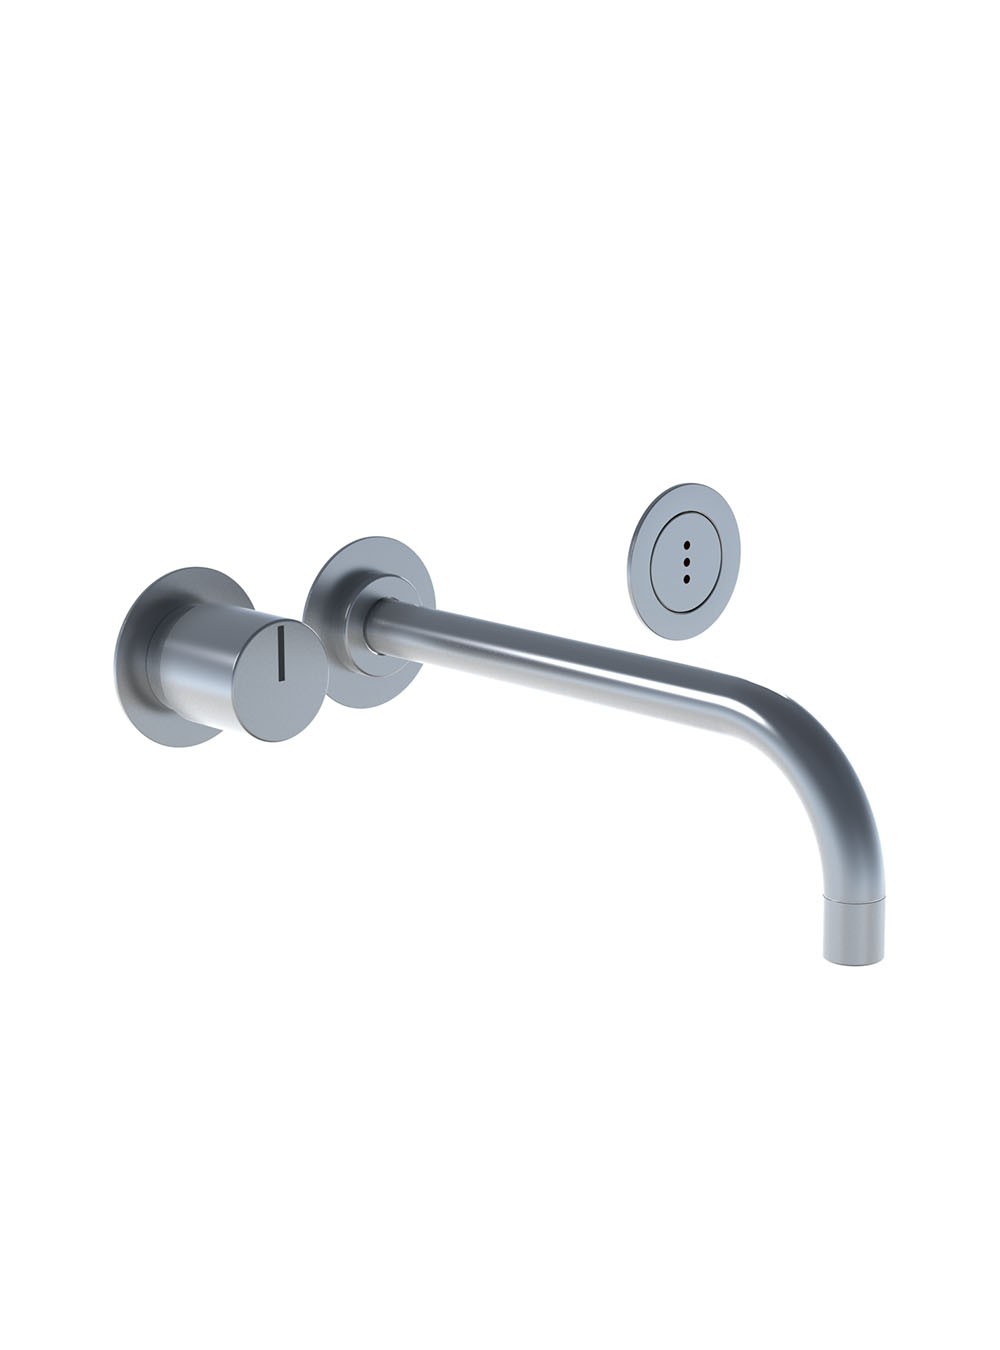 4921: Build-in basin mixer with on-off sensor for ‘hands free’ operation.Sensor aligned with wall. Valv...